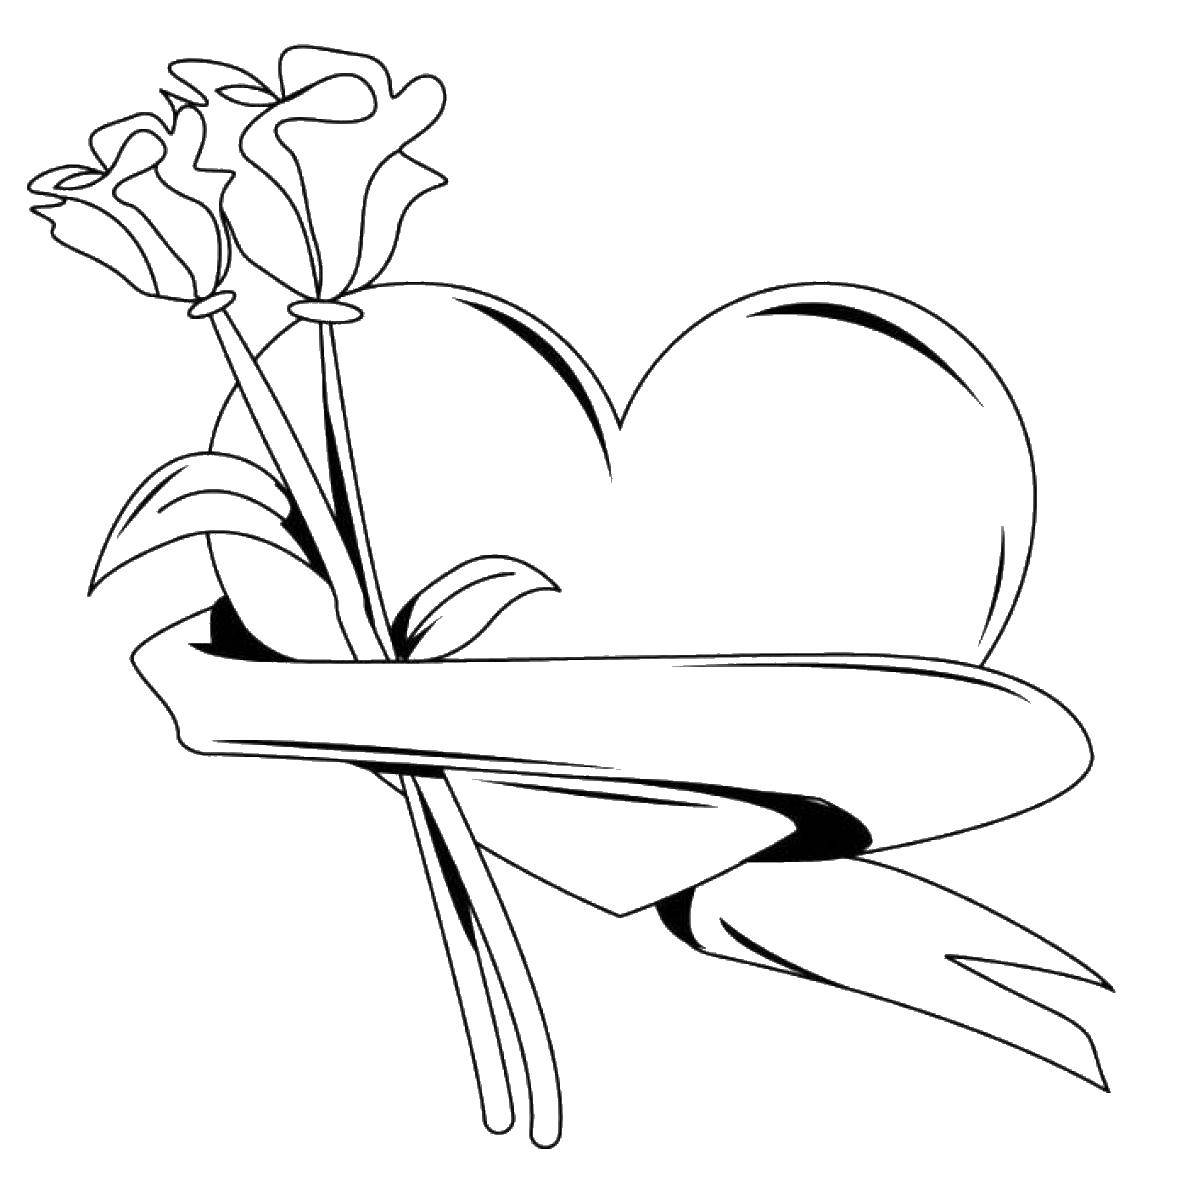 Coloring Heart entwined with a ribbon with roses. Category Hearts. Tags:  Heart, love, rose.